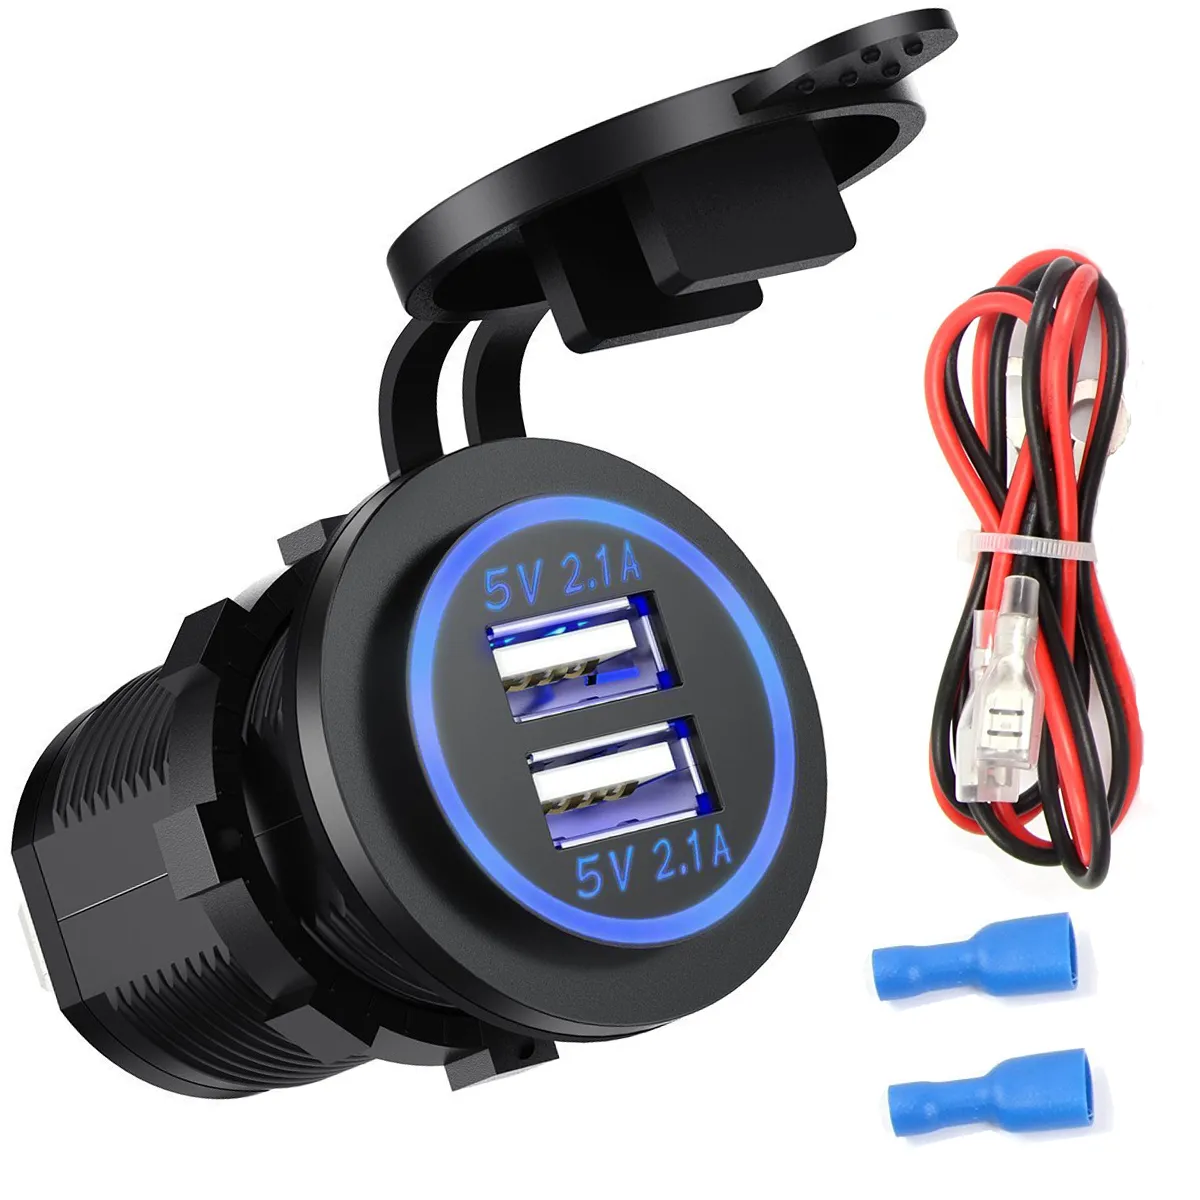 12V/24V Waterproof Dual USB Charger Socket Power Outlet Adapter 2.1A & 2.1A  4.2A For Car Boat Marine RV Mobile With Wire Fuse From Jingshitong, $3.08